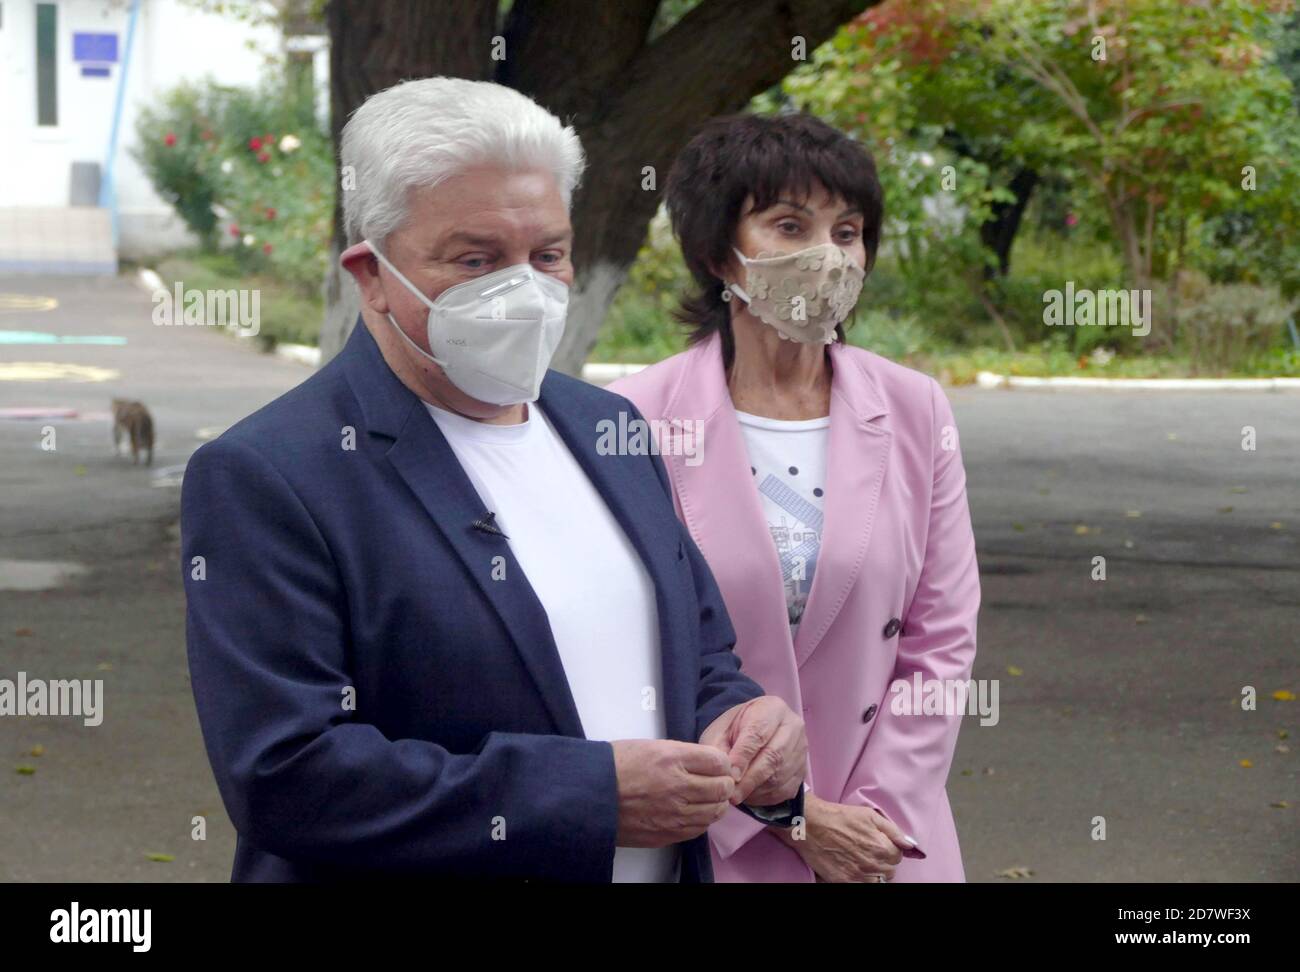 Non Exclusive: ODESA, UKRAINE - OCTOBER 25, 2020 - Candidate to the position of the Odesa city head Oleh Filimonov and his wife Larysa Filimonova are Stock Photo